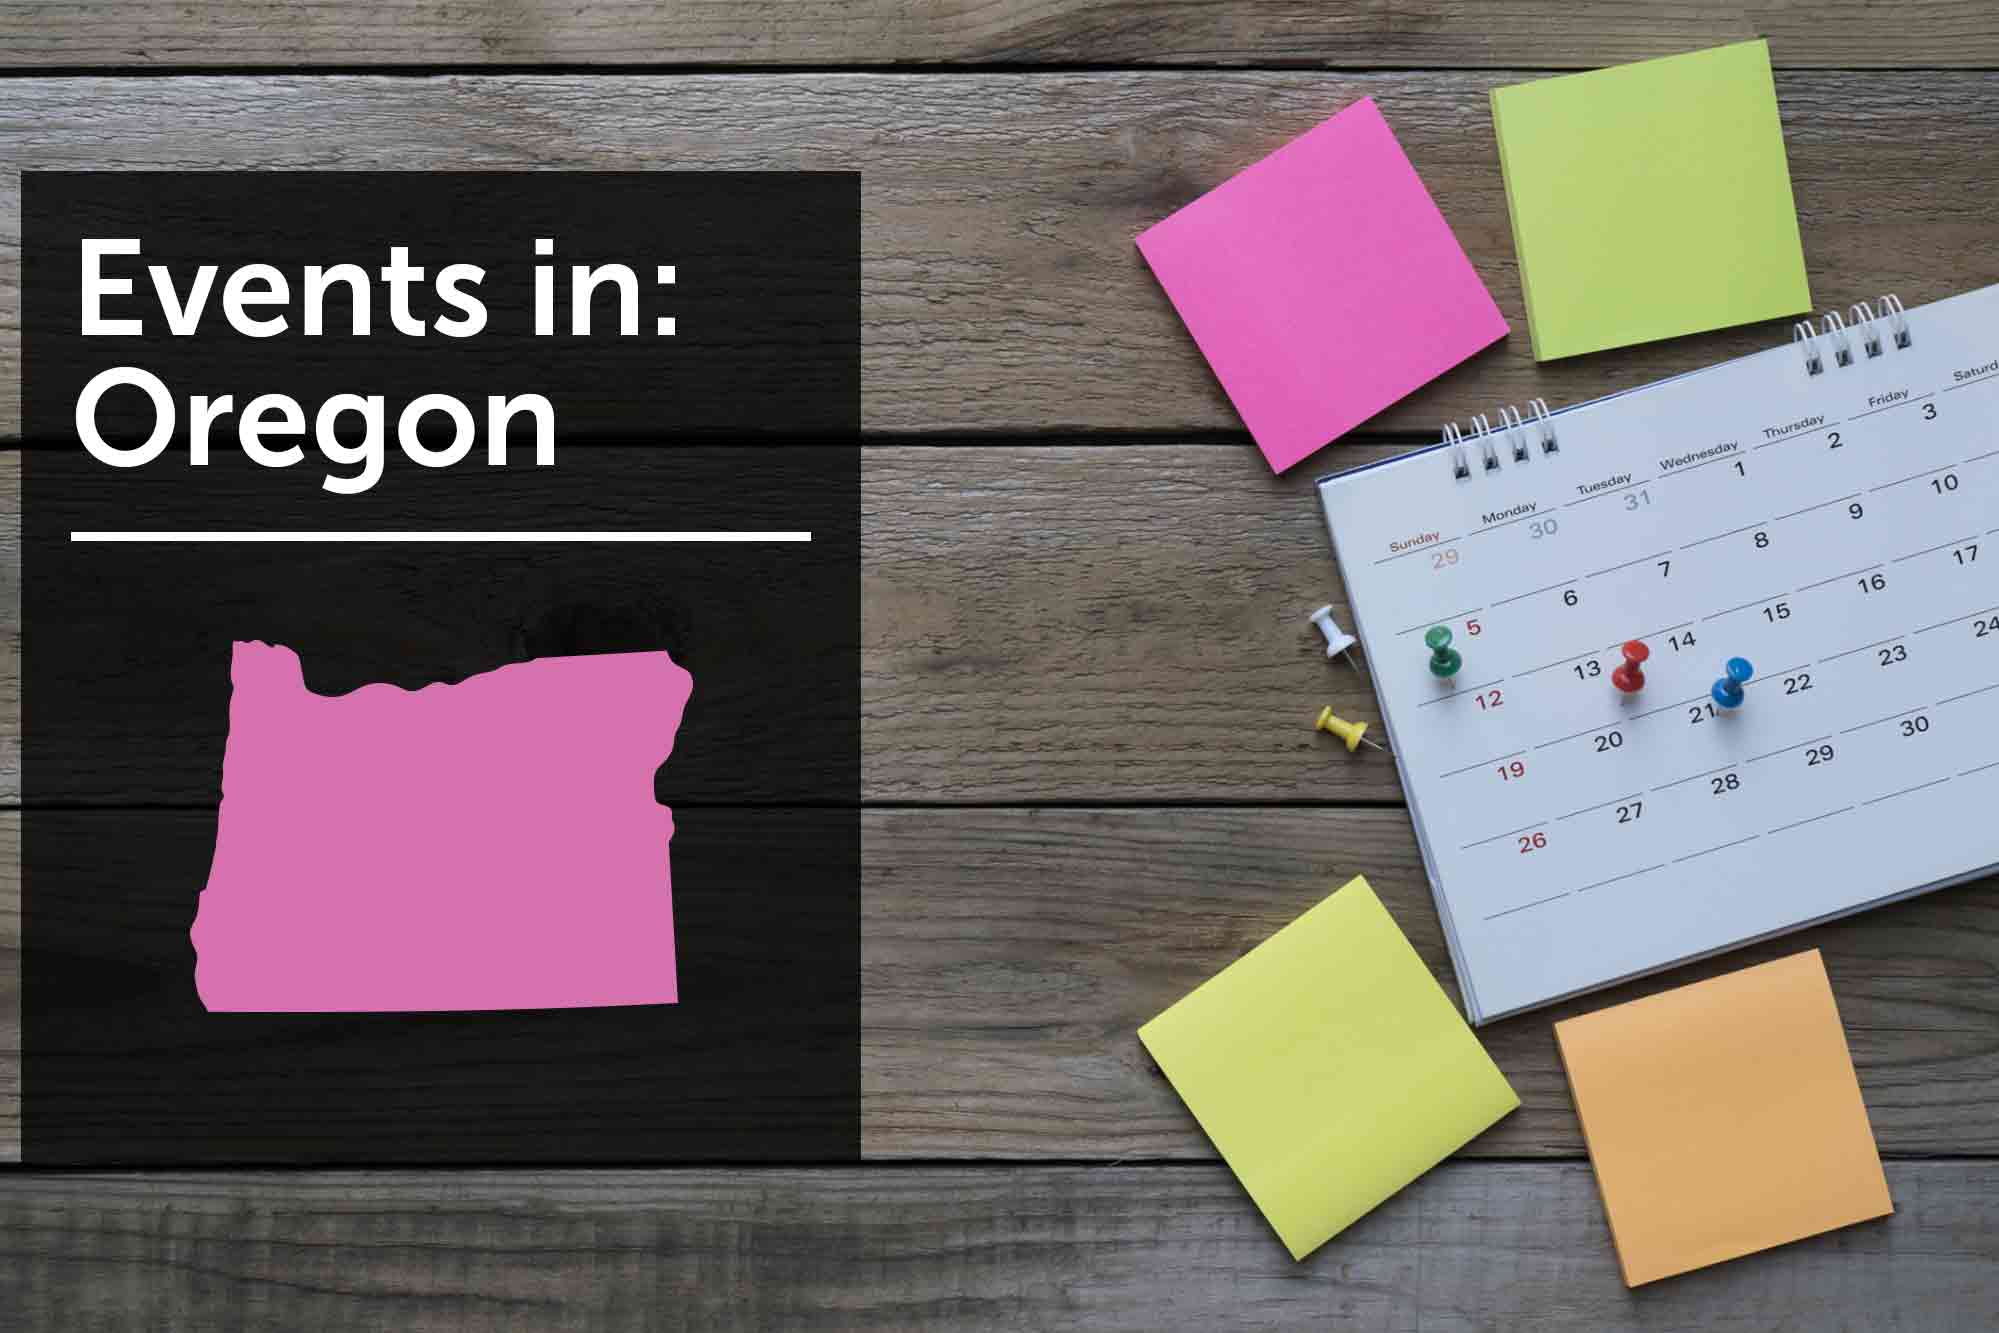 Women's business events in Oregon